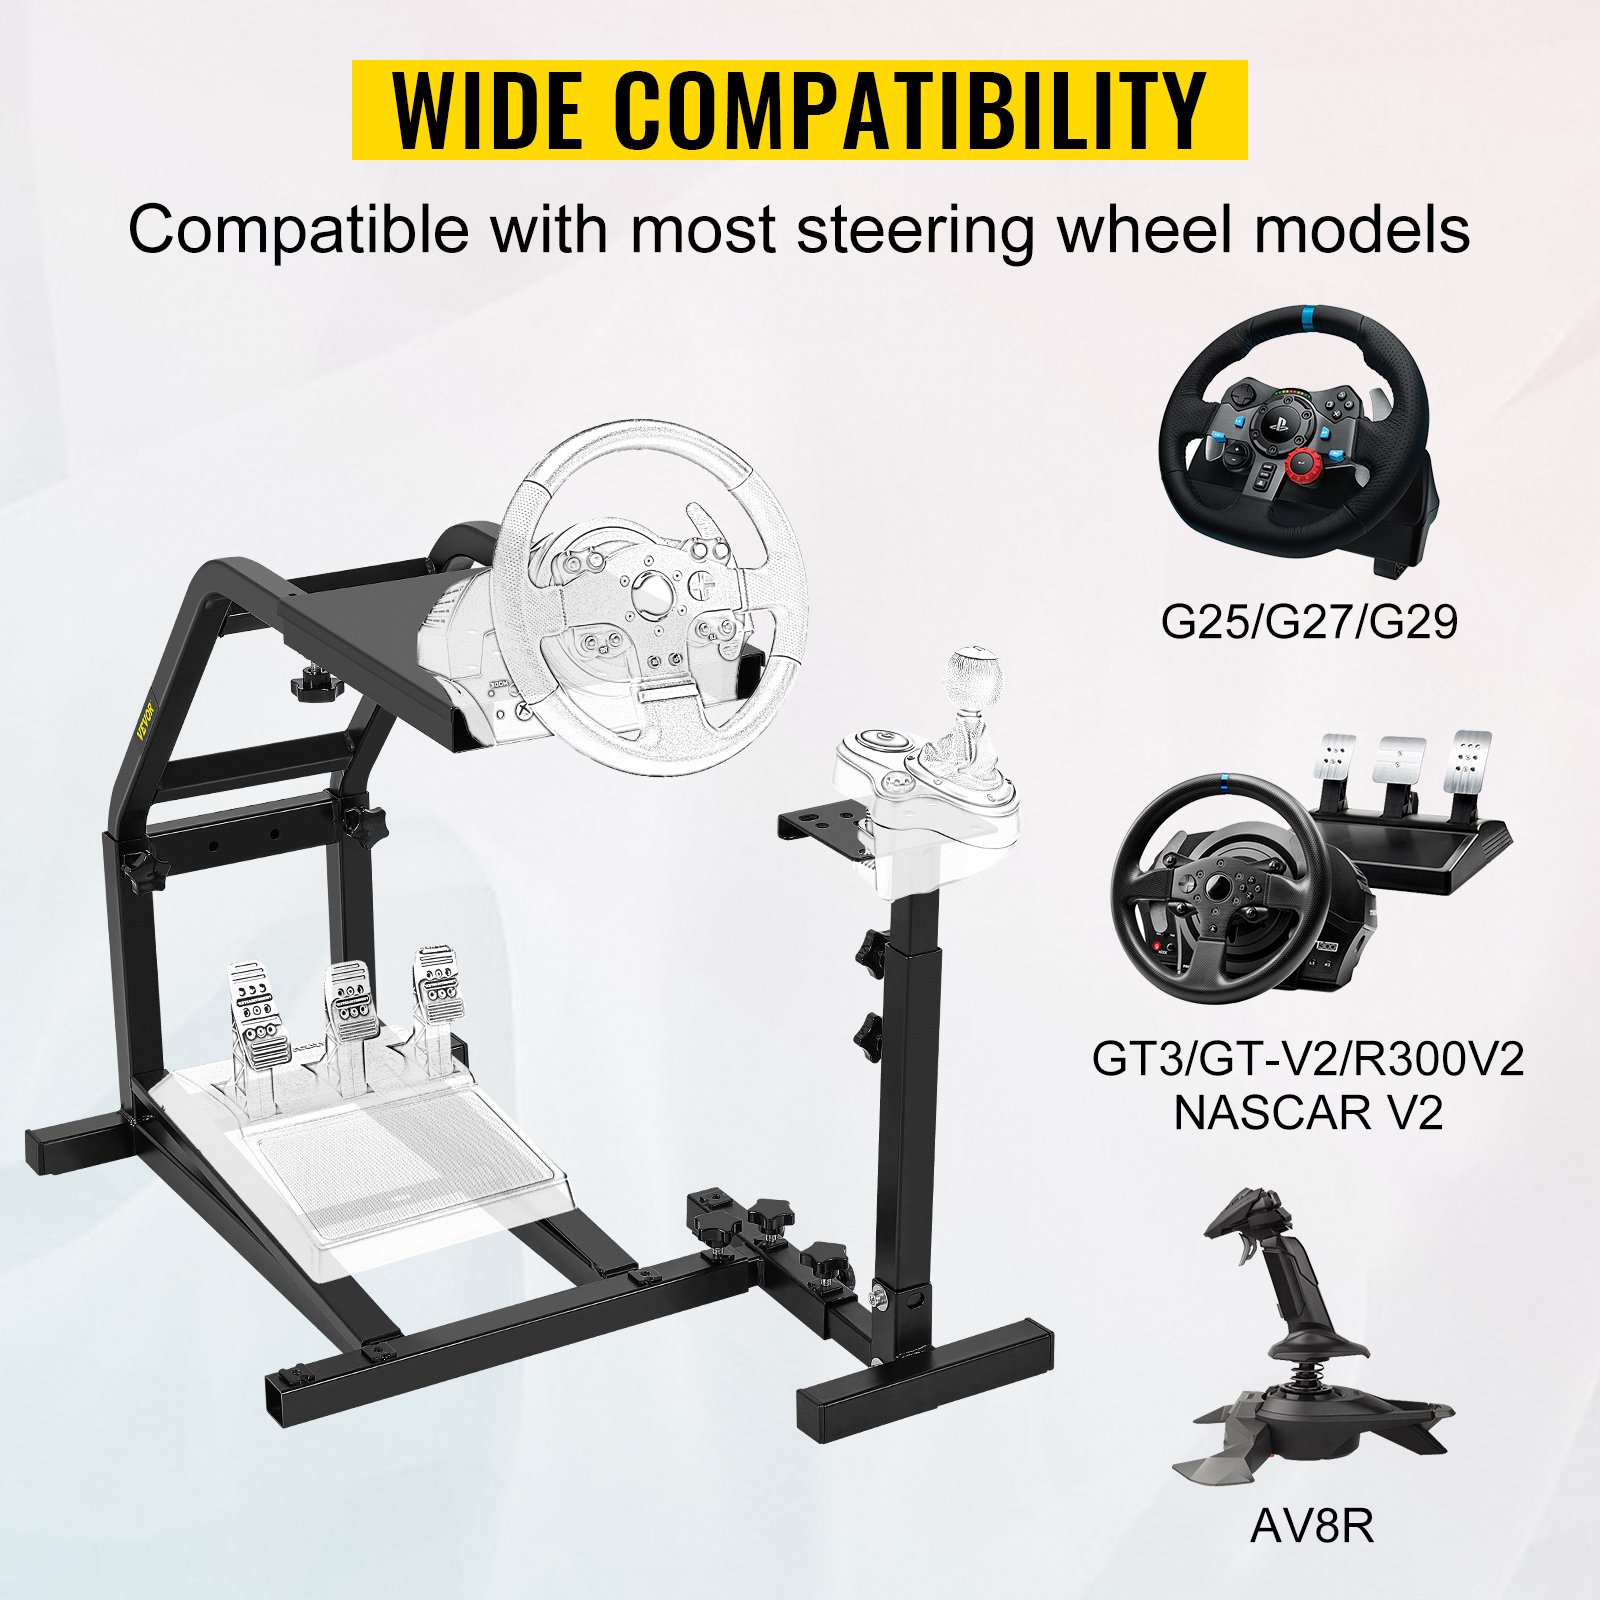 Racing Wheel Stand Driving Simulator Cockpit Wheel & Pedals Not Included Hihone Racing Wheel Stand Gaming Wheel Stand 34Height Adjustable Competible with G27 G25 G29 